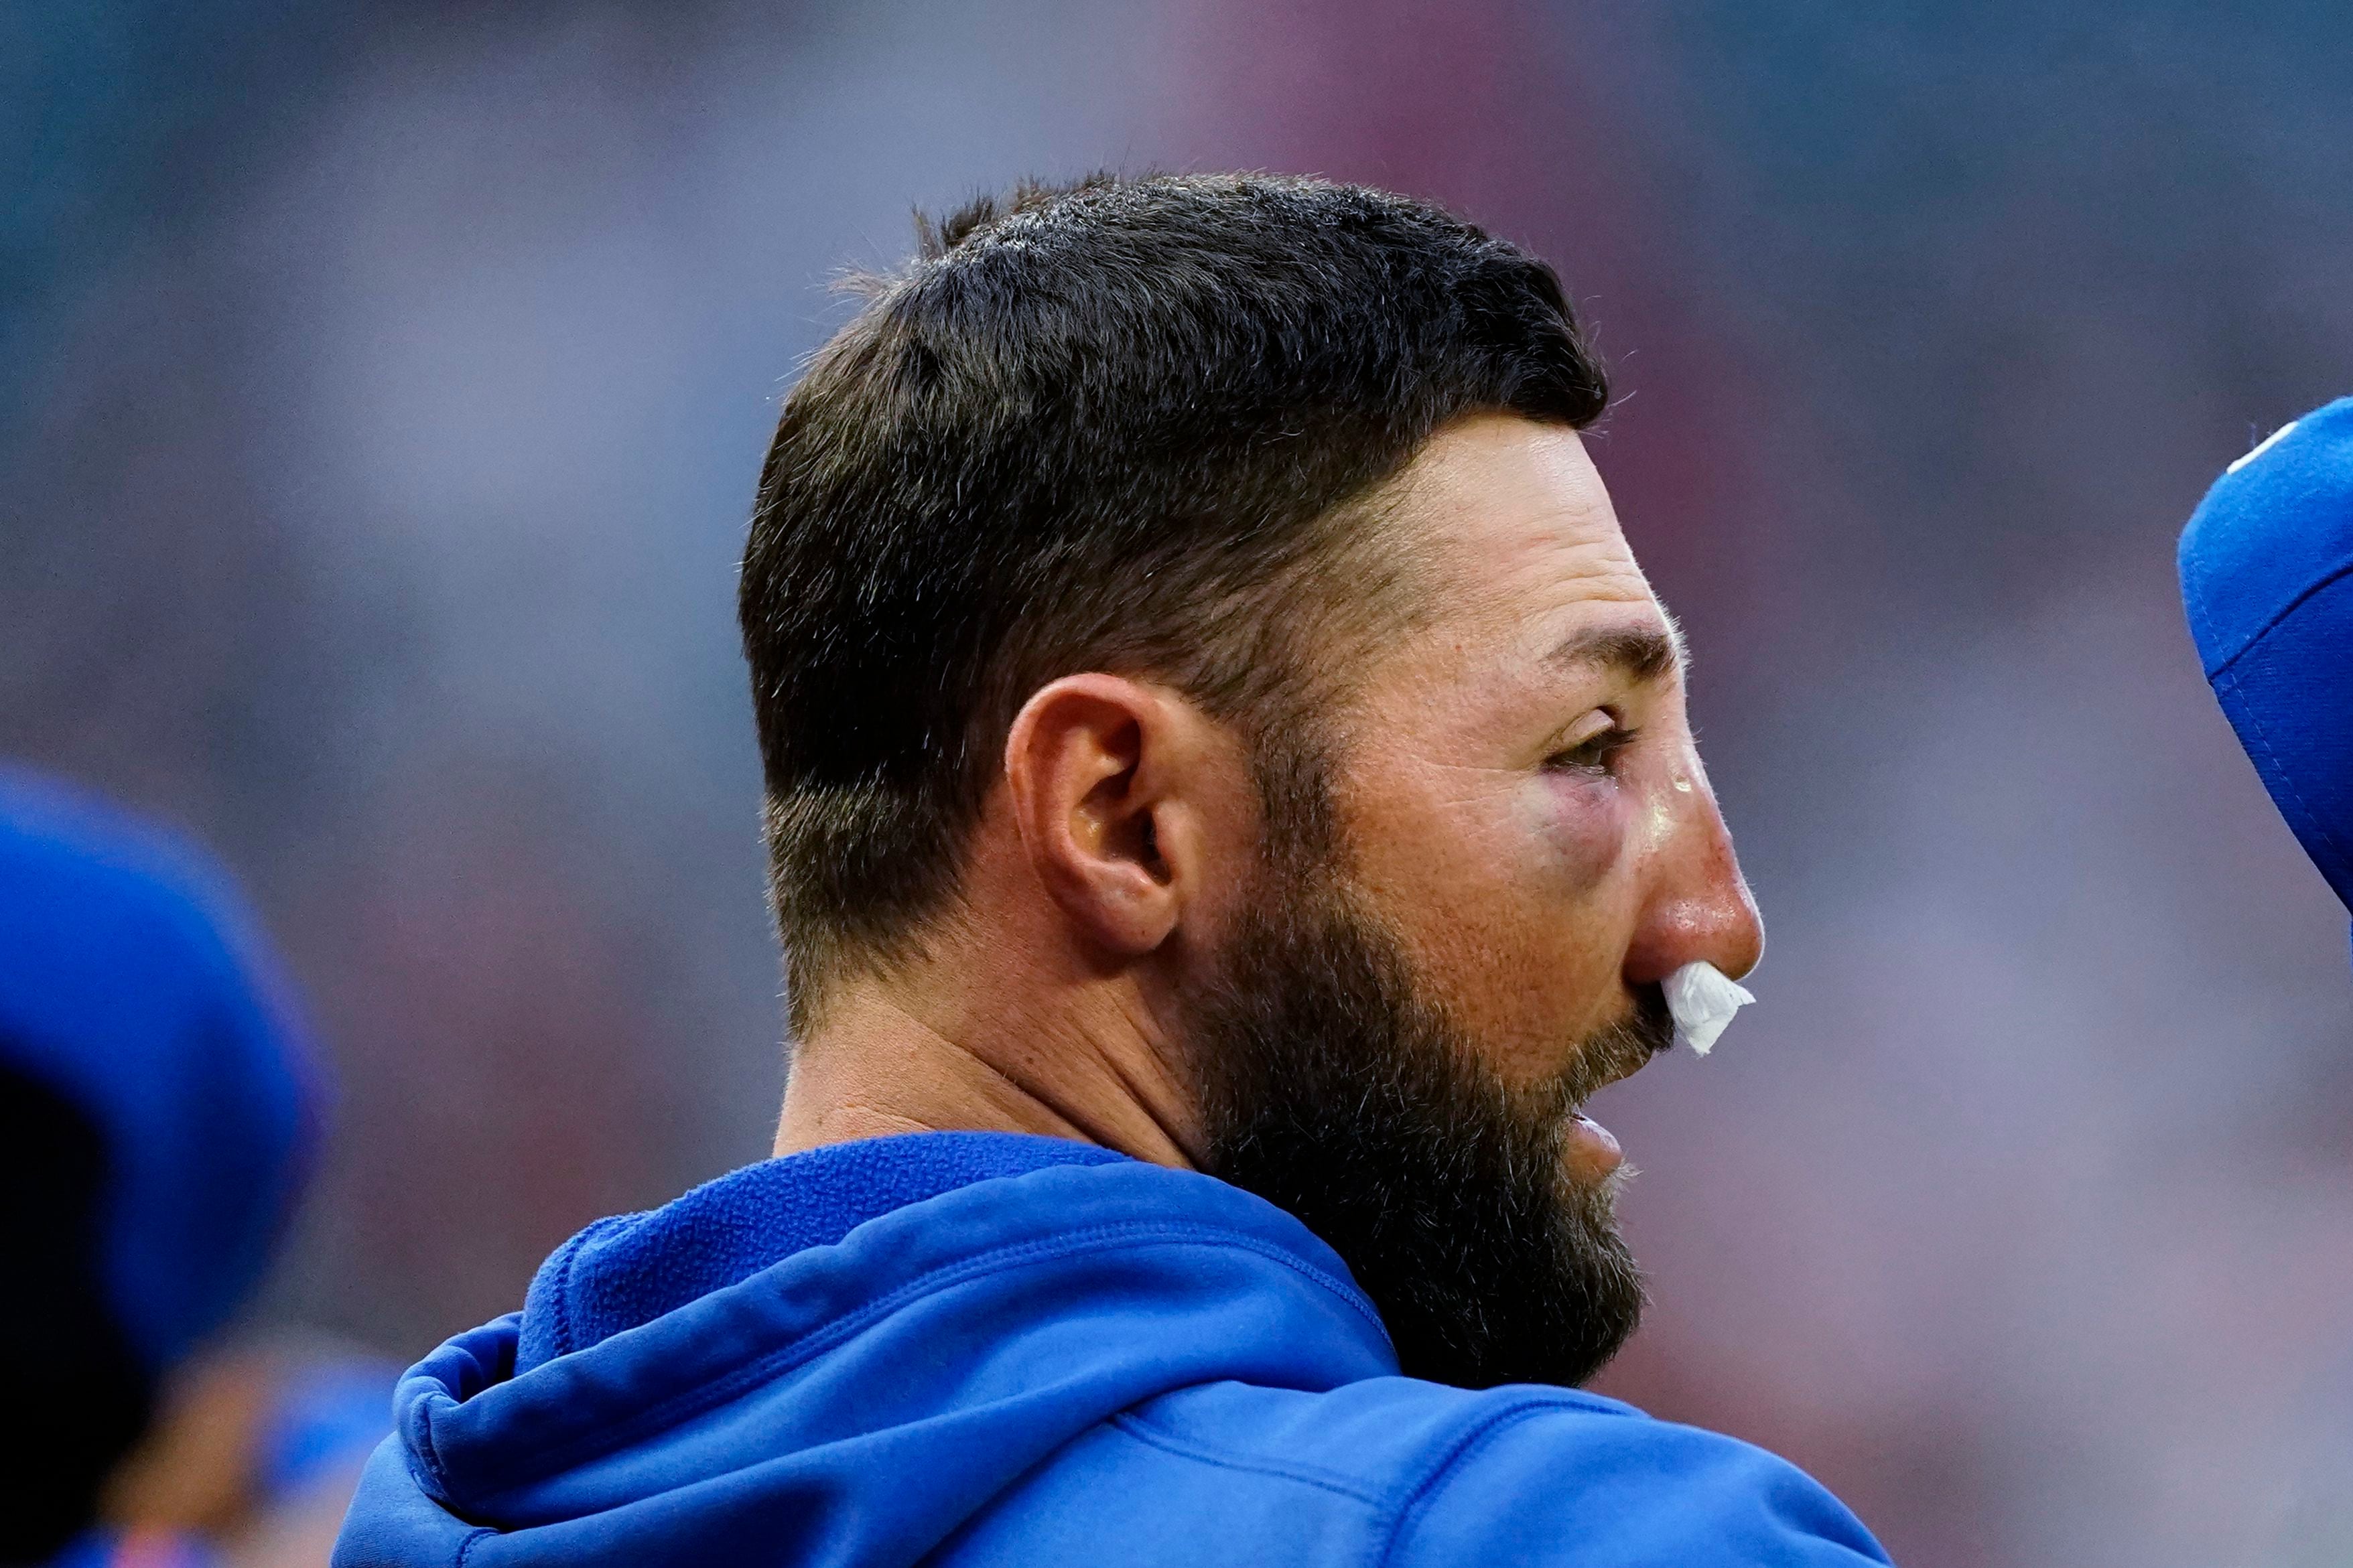 Mets' Pillar has multiple nasal fractures after hit by pitch – The